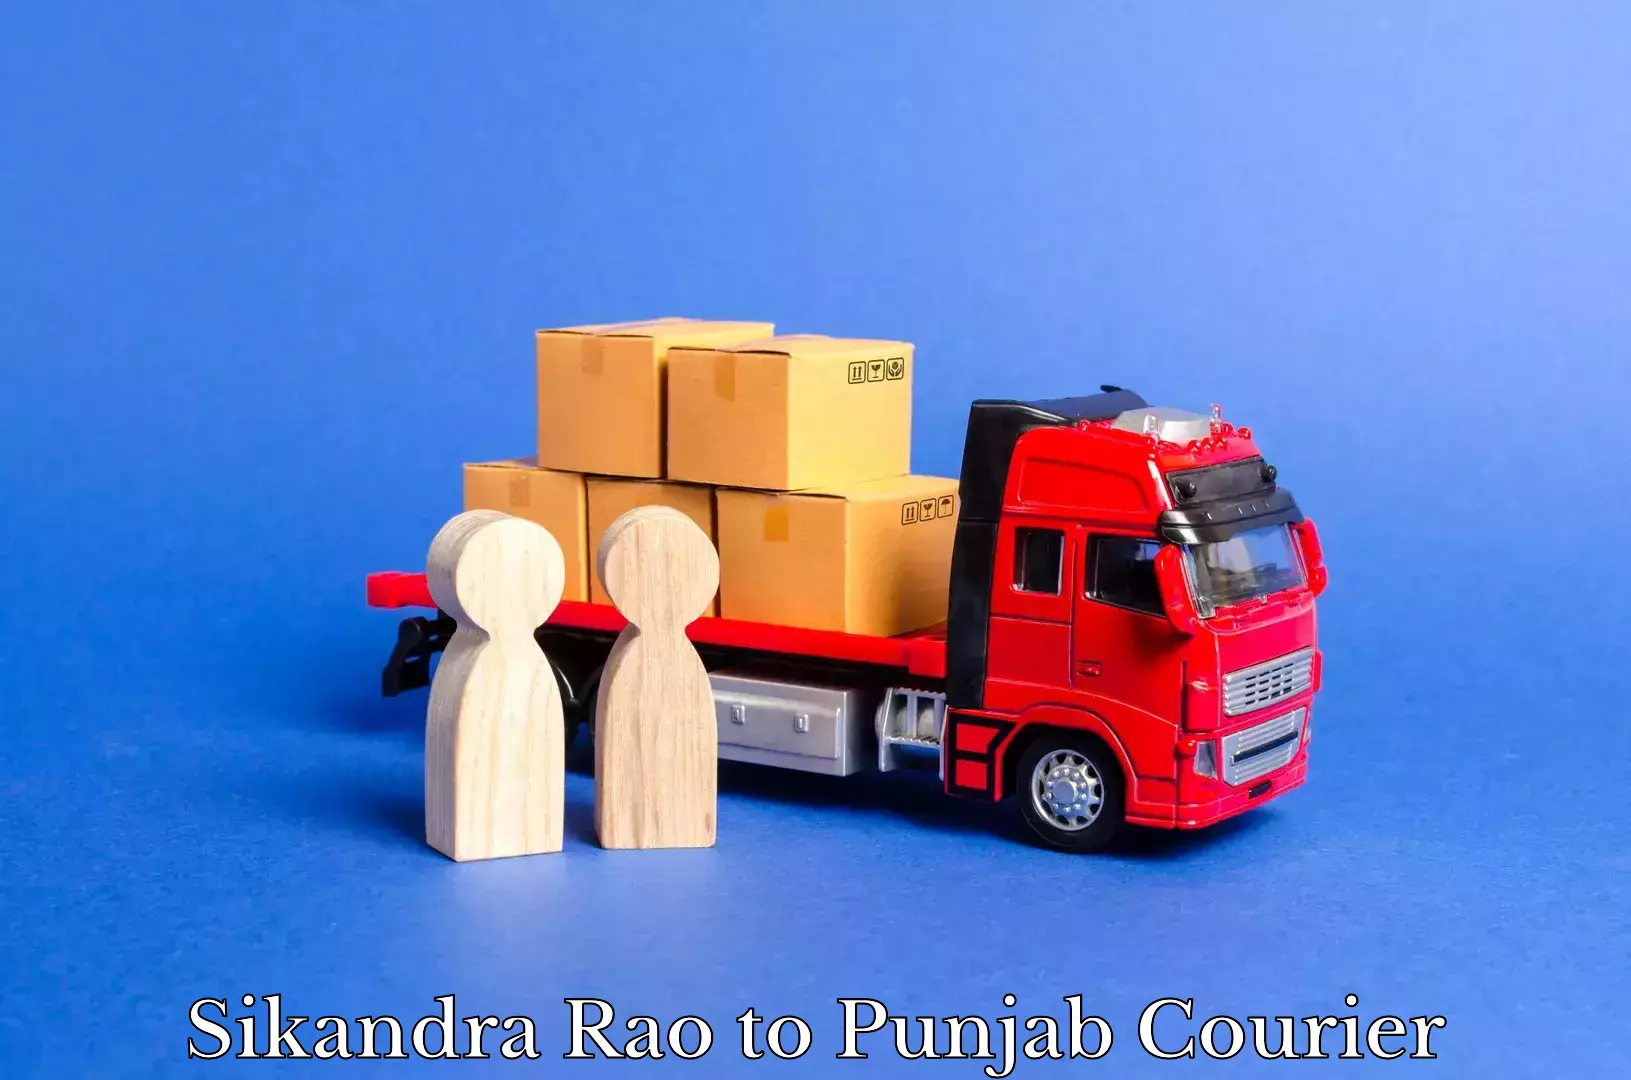 Round-the-clock parcel delivery Sikandra Rao to Punjab